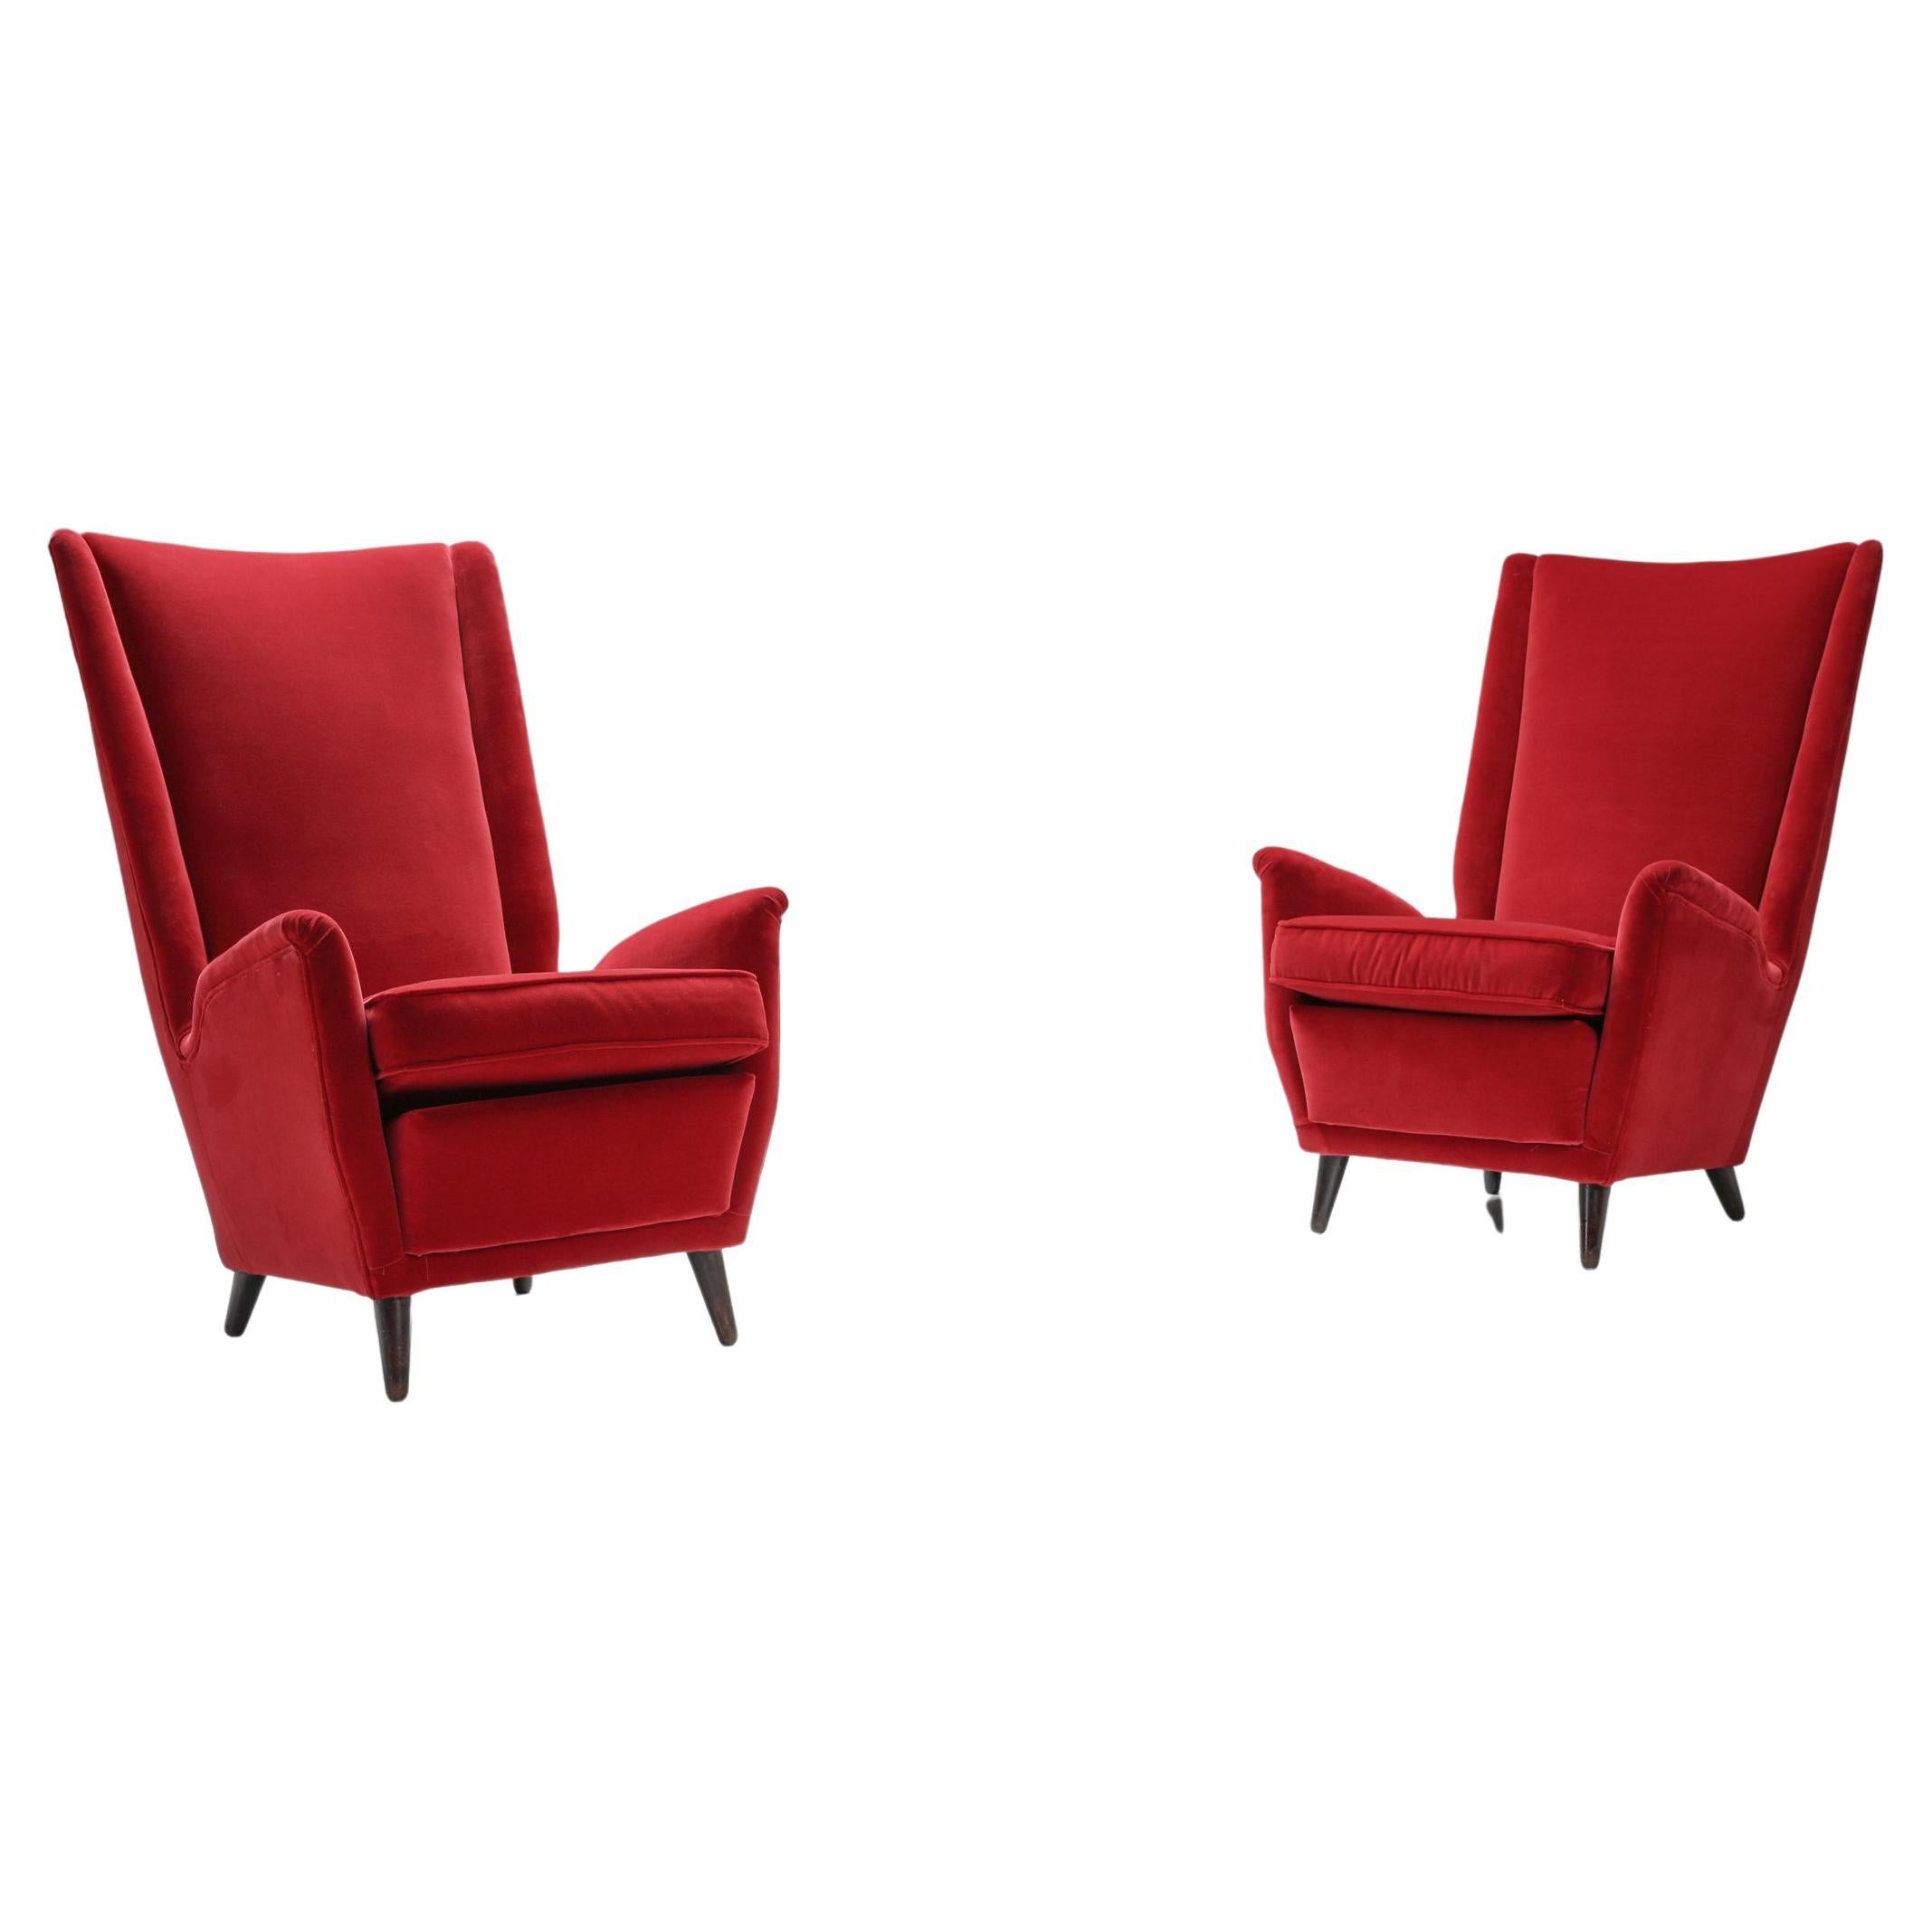 Italian Wingback Armchair in Red Velvet by Gio Ponti, 1950s For Sale